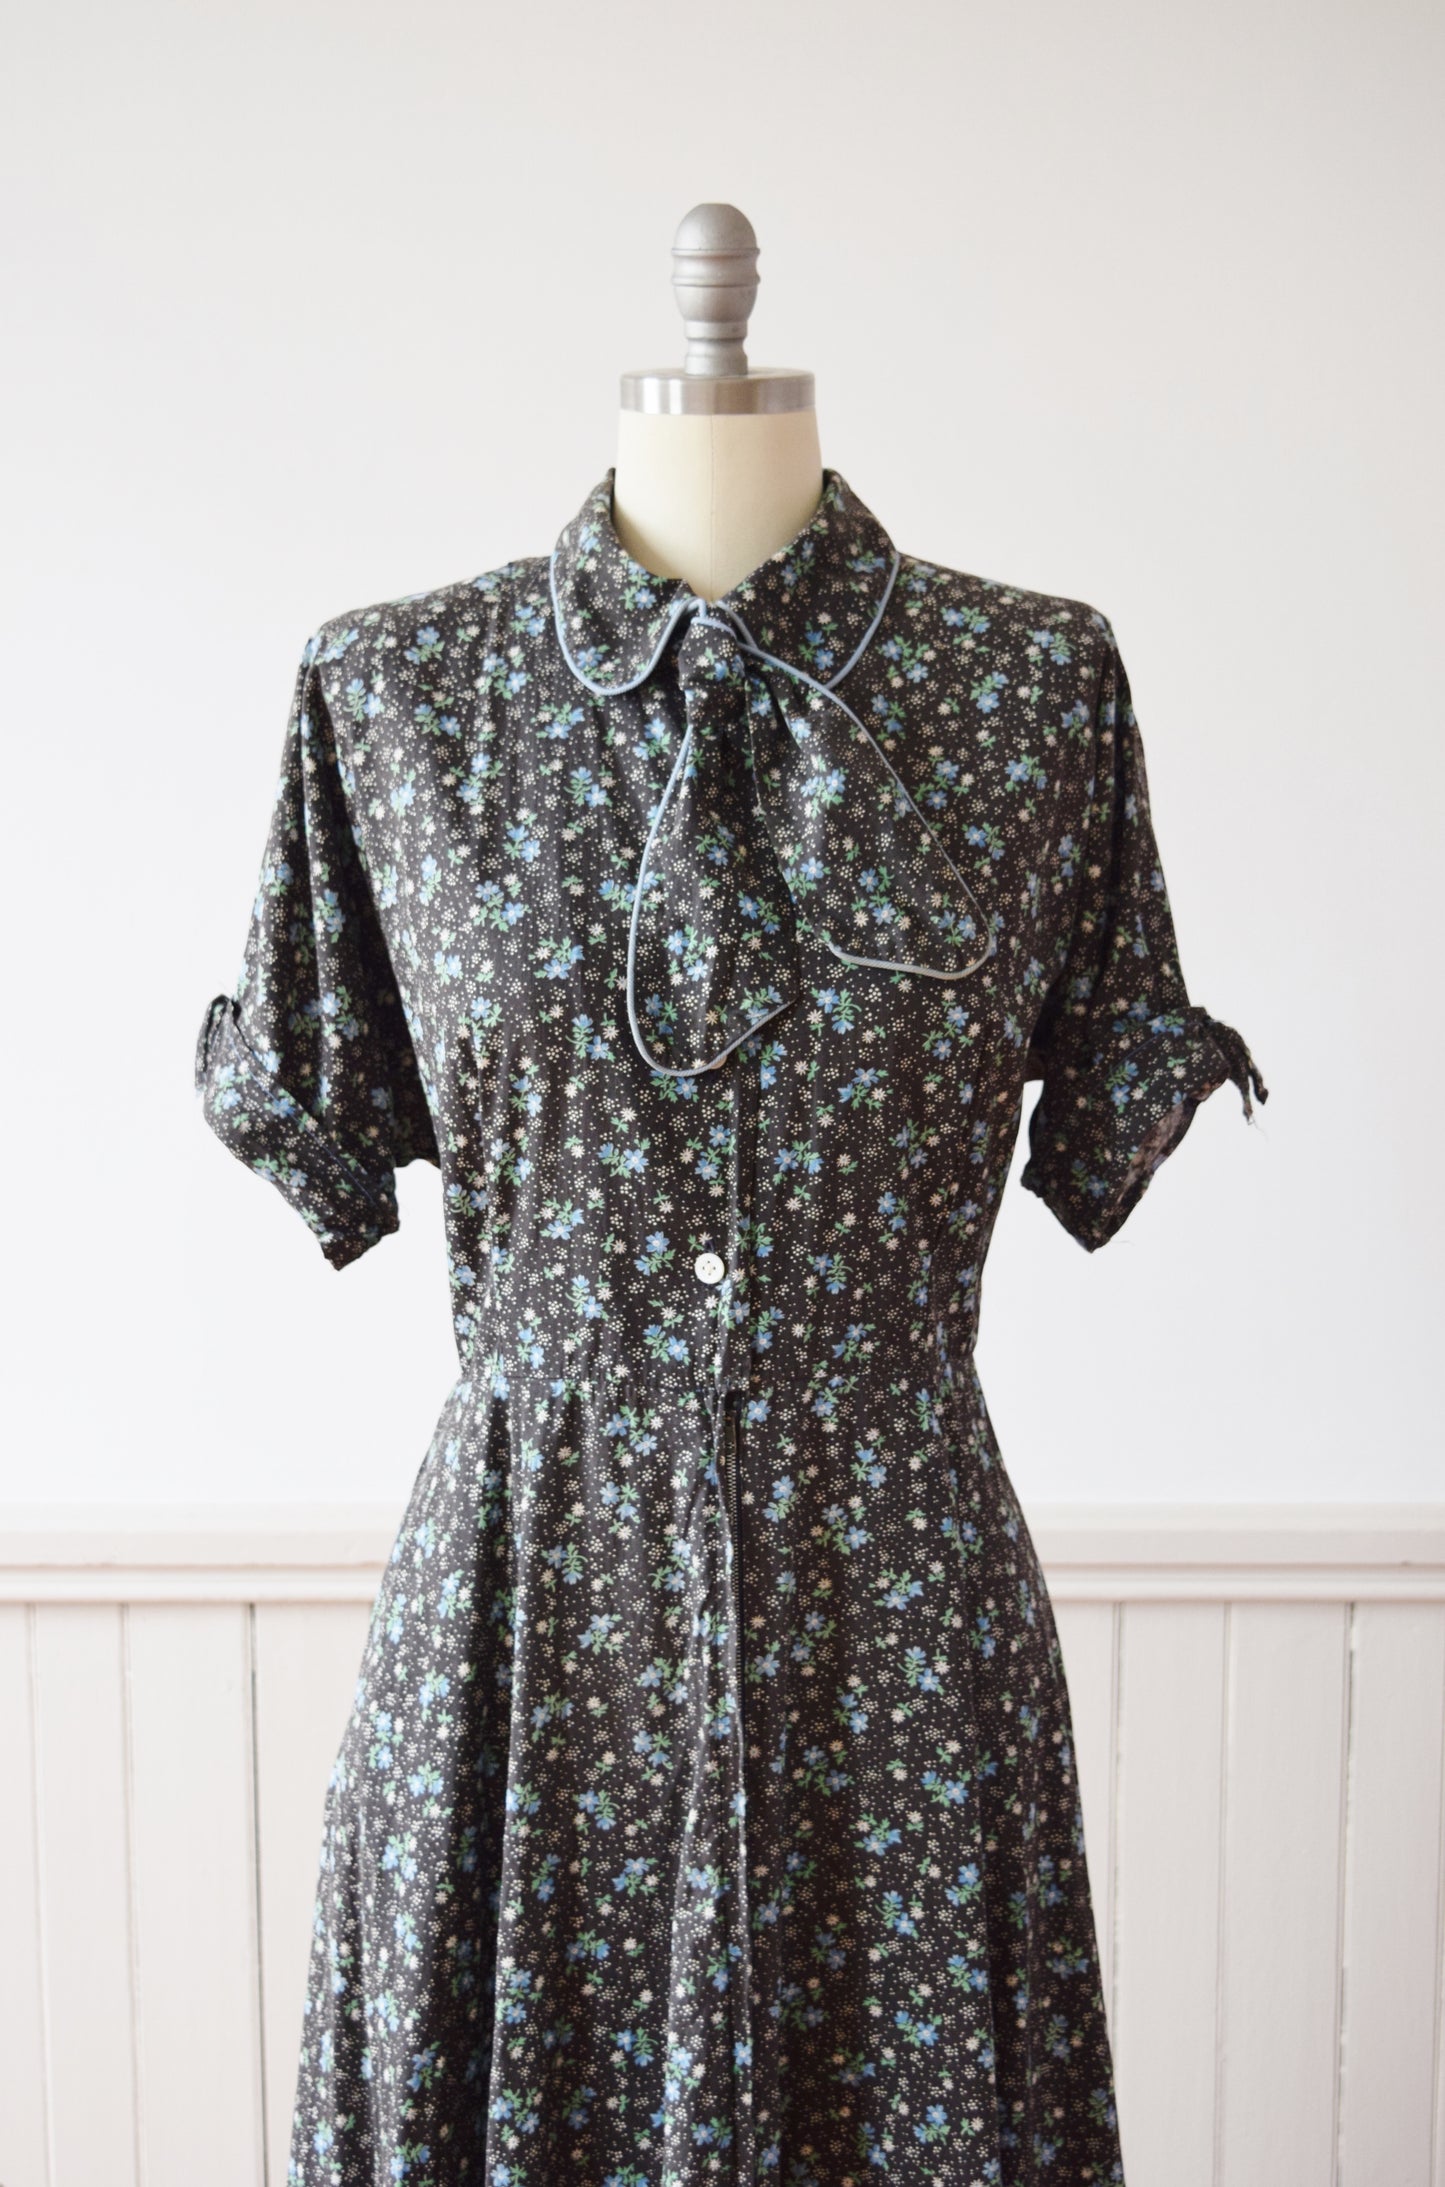 Early 1950s Zip Front Cotton Dress by Kamore | M